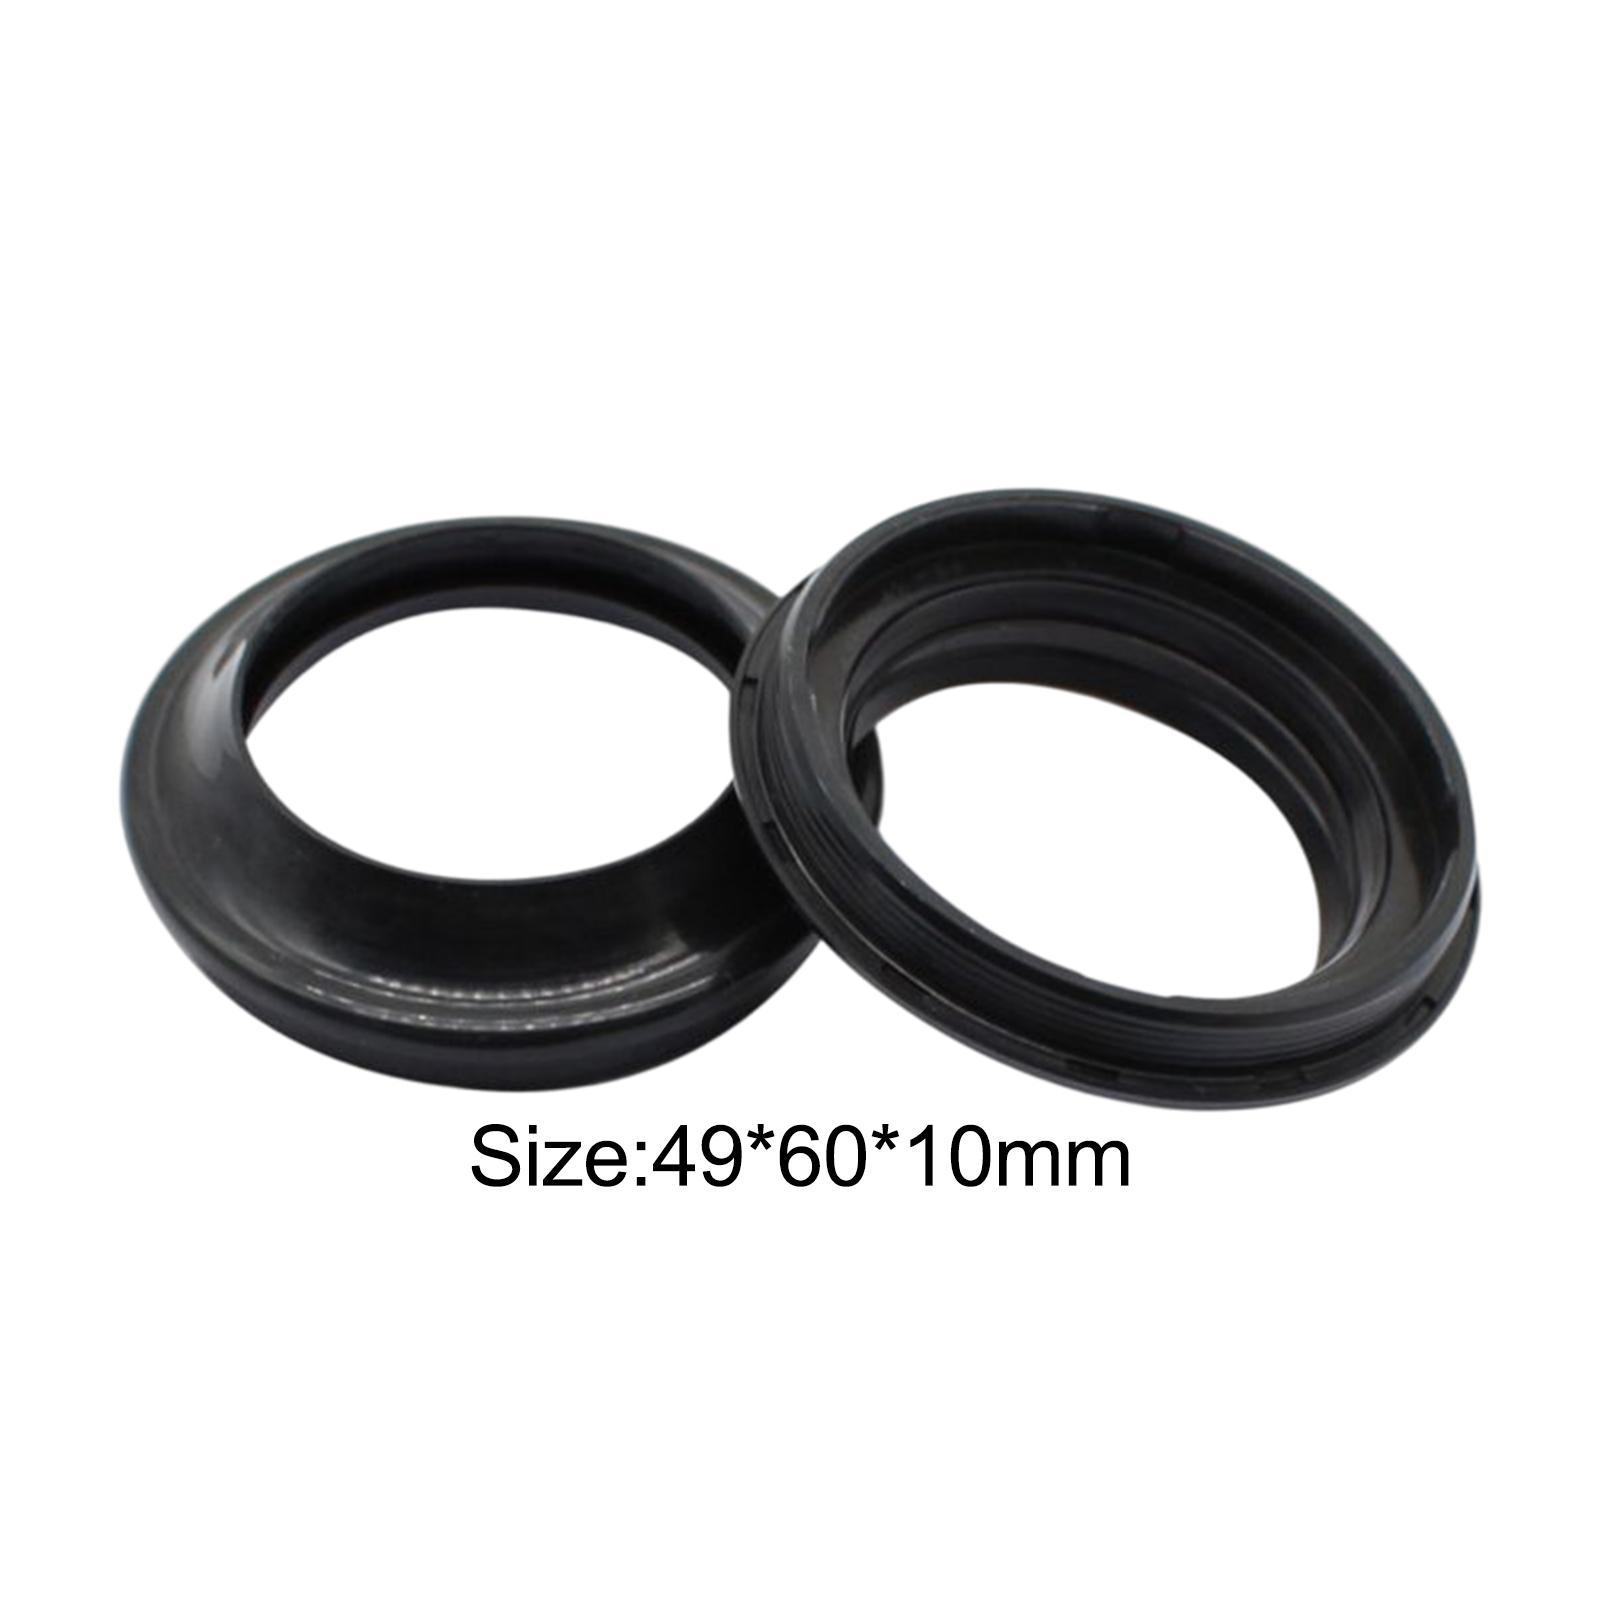 Front Fork Shock Oil Seal and Dust Seal Set for Suzuki Rm-Z450 Z400S